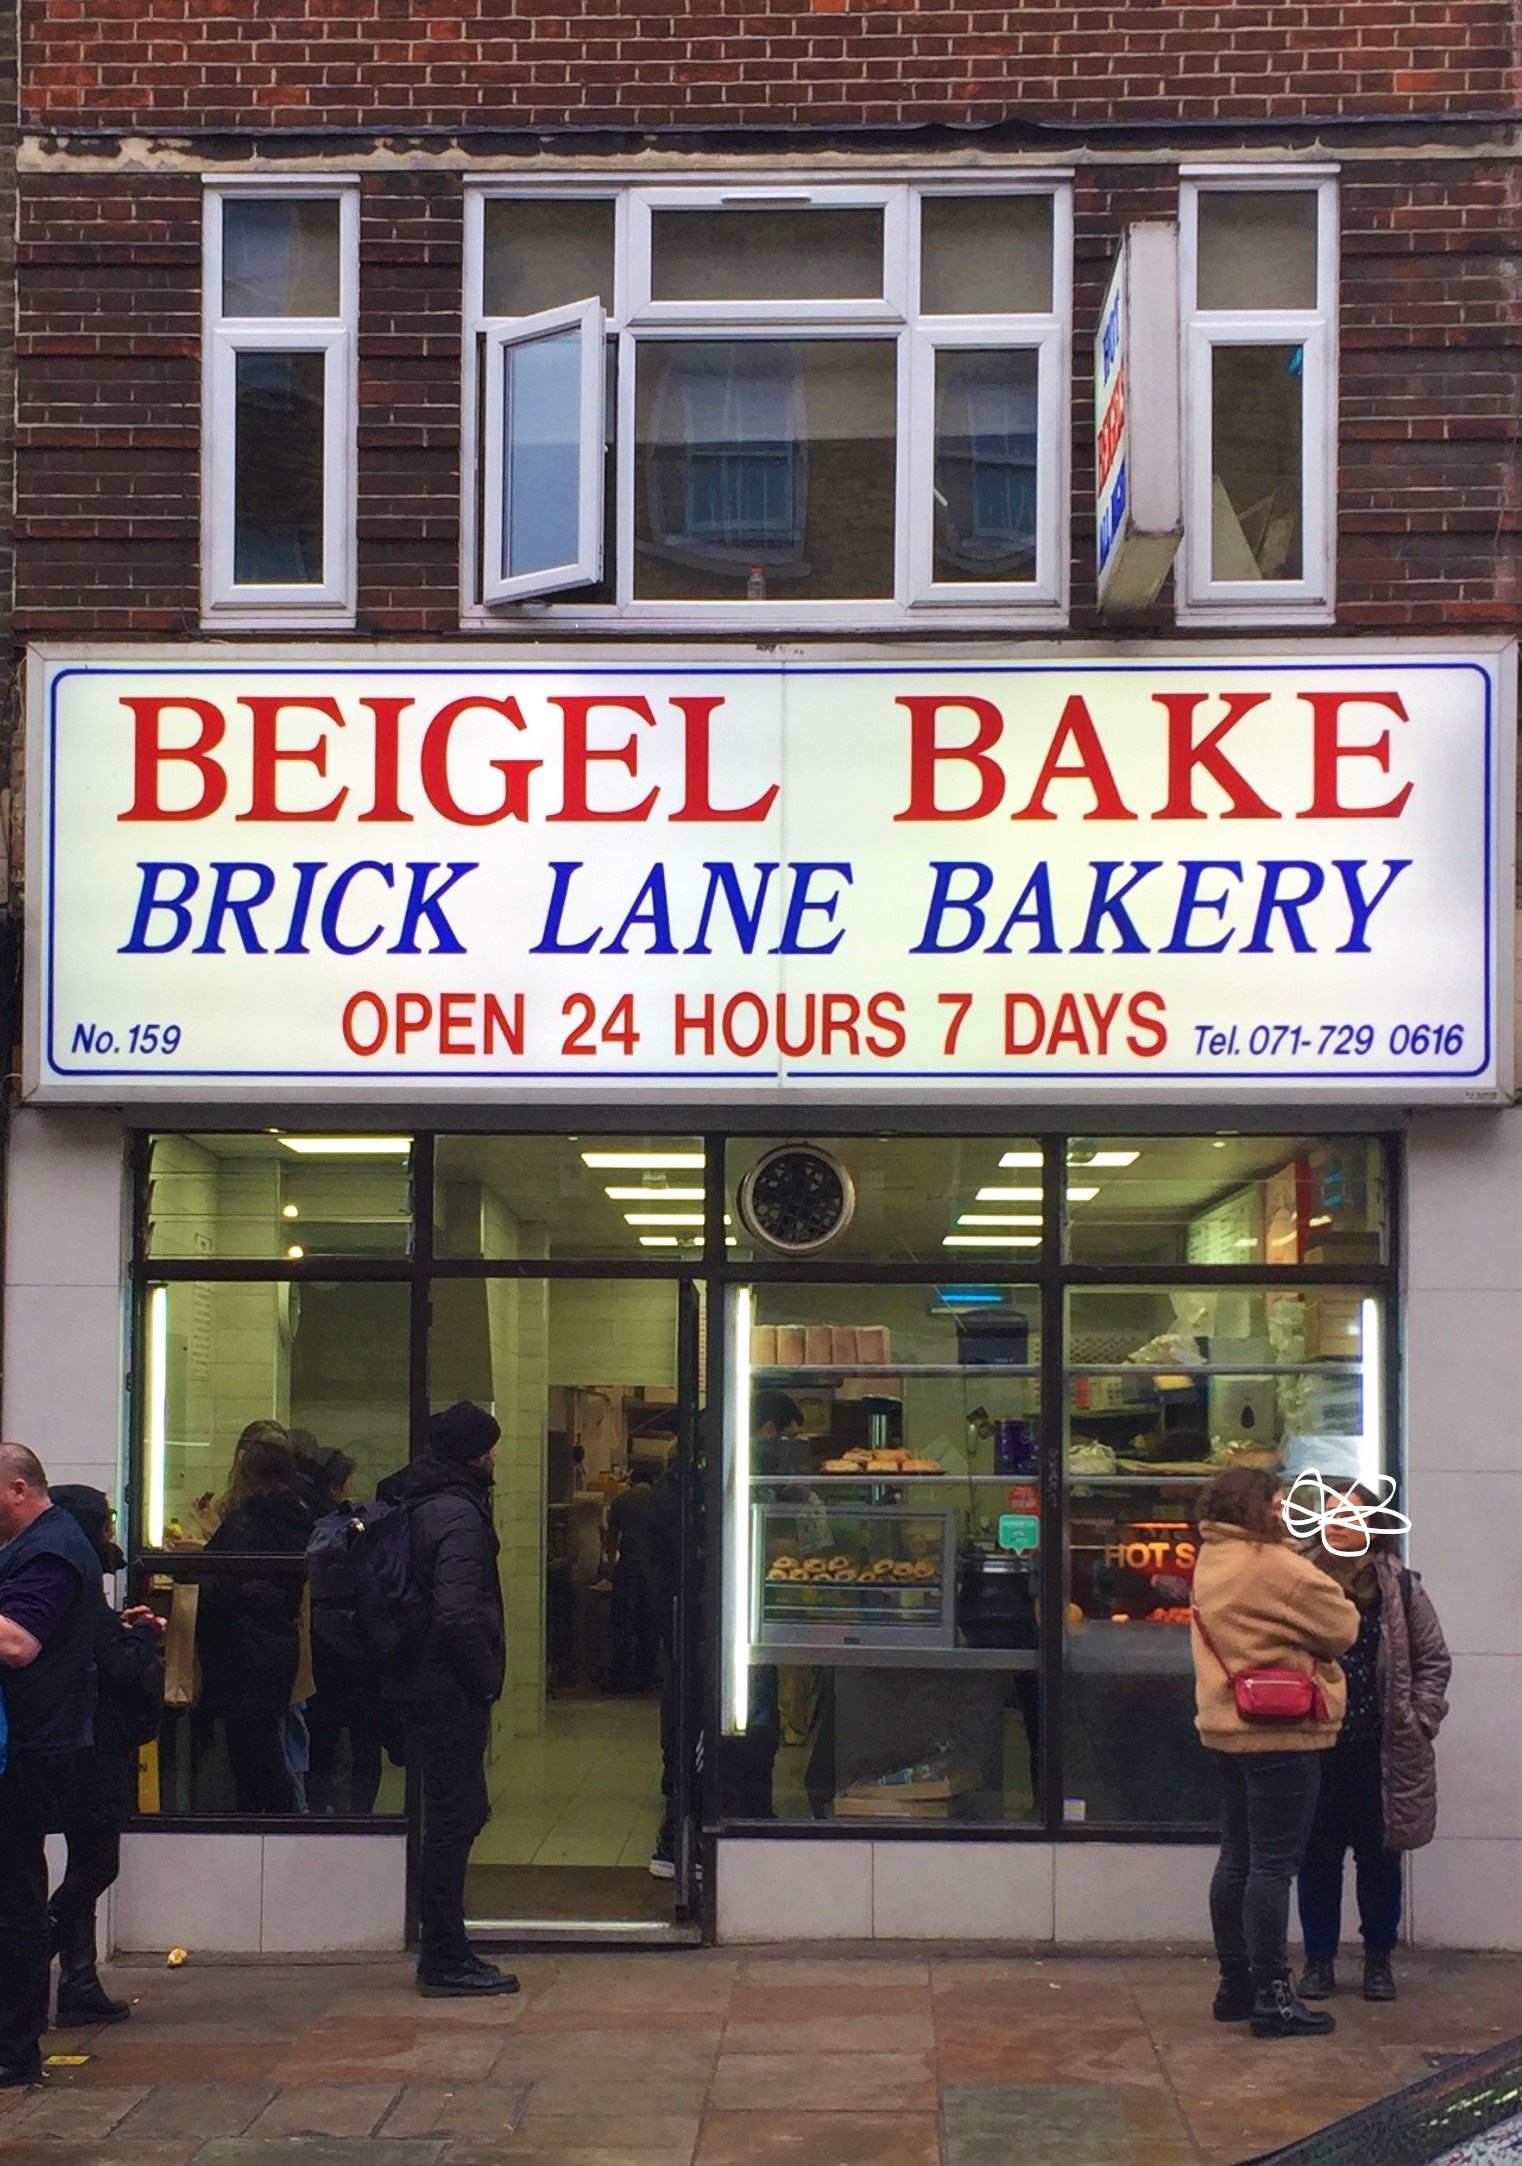 I totes need a kosher roll. . .” – Beigel Bake – The Poet of Cuisine